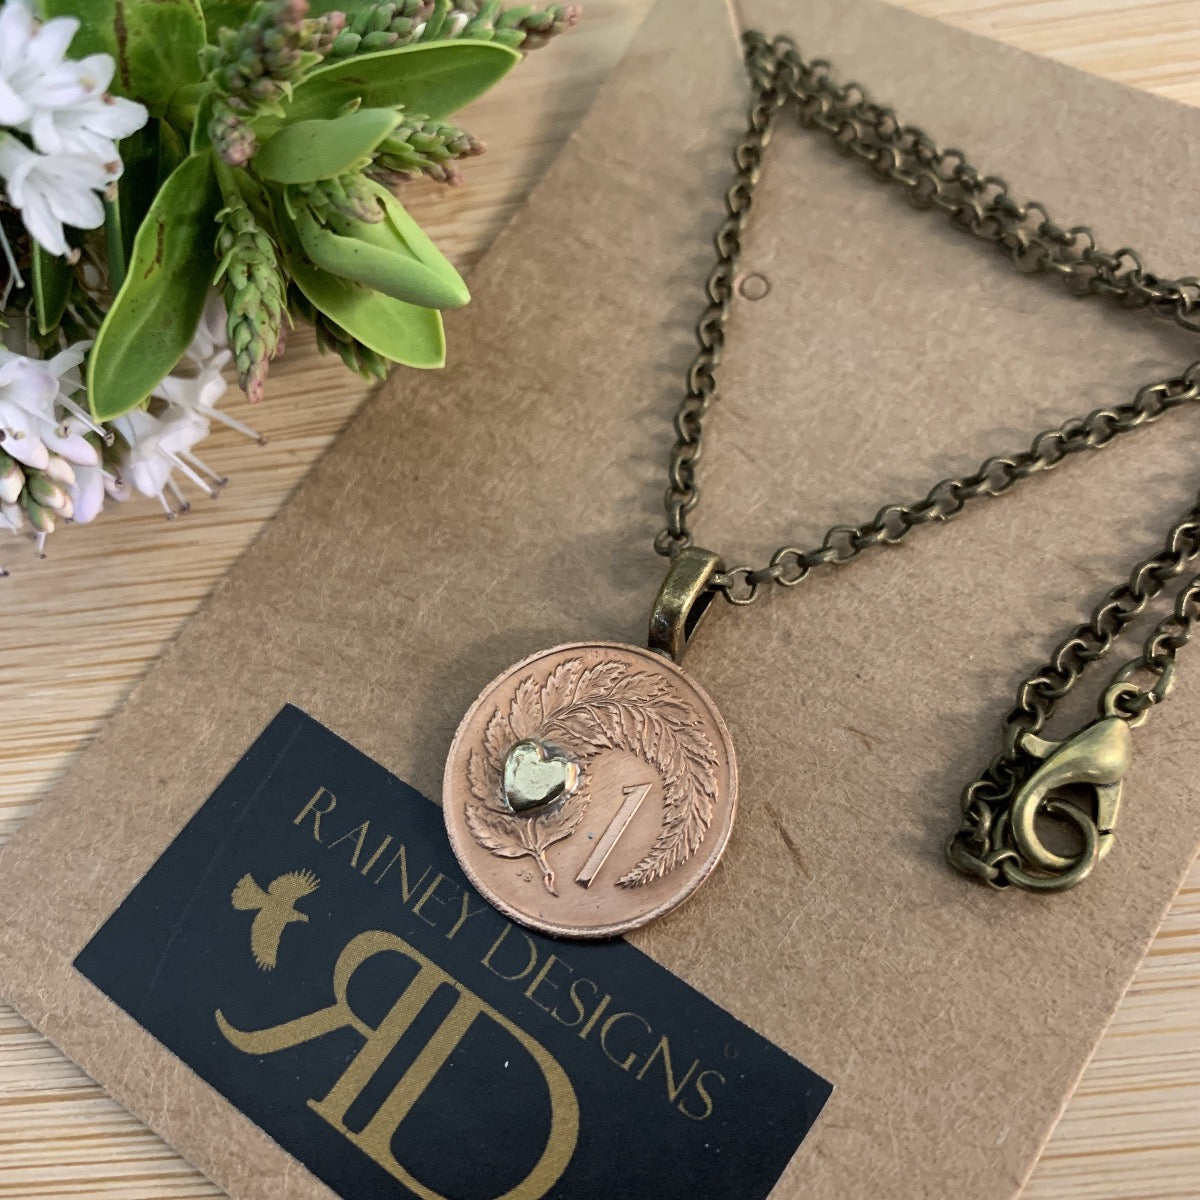 Petite One Cent Coin Necklace